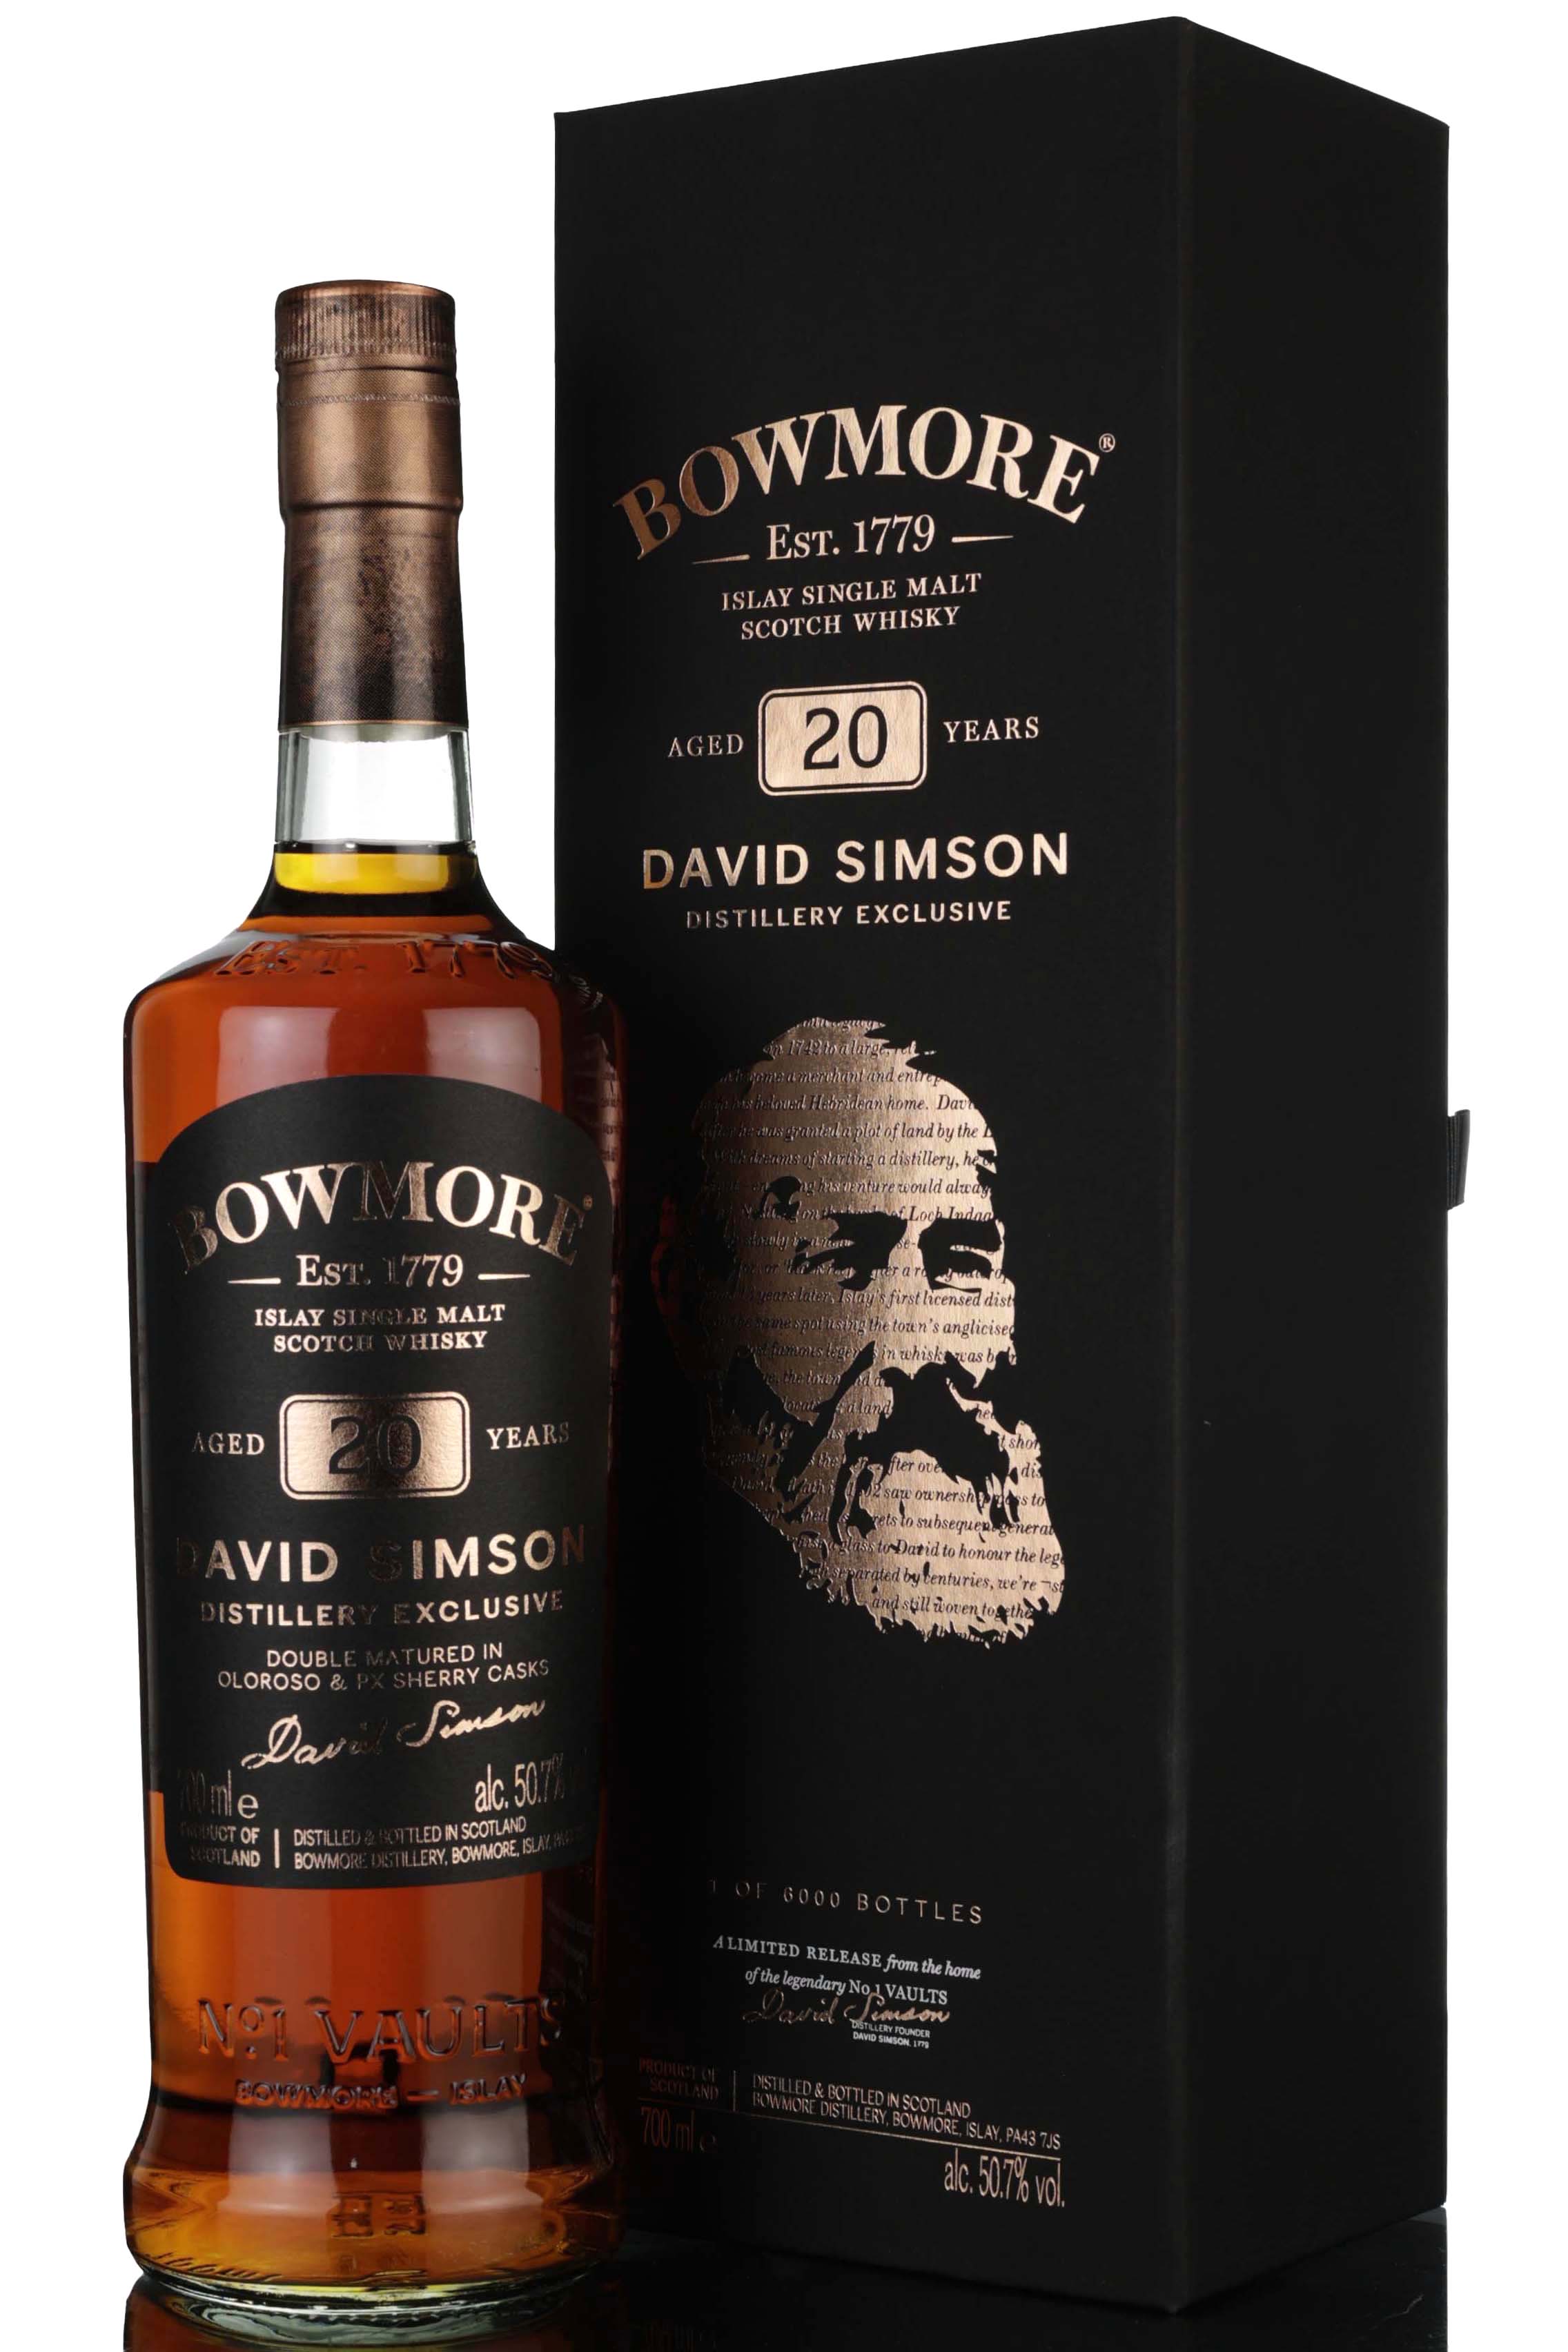 Bowmore 20 Year Old - David Simson Distillery Exclusive - 2020 Release